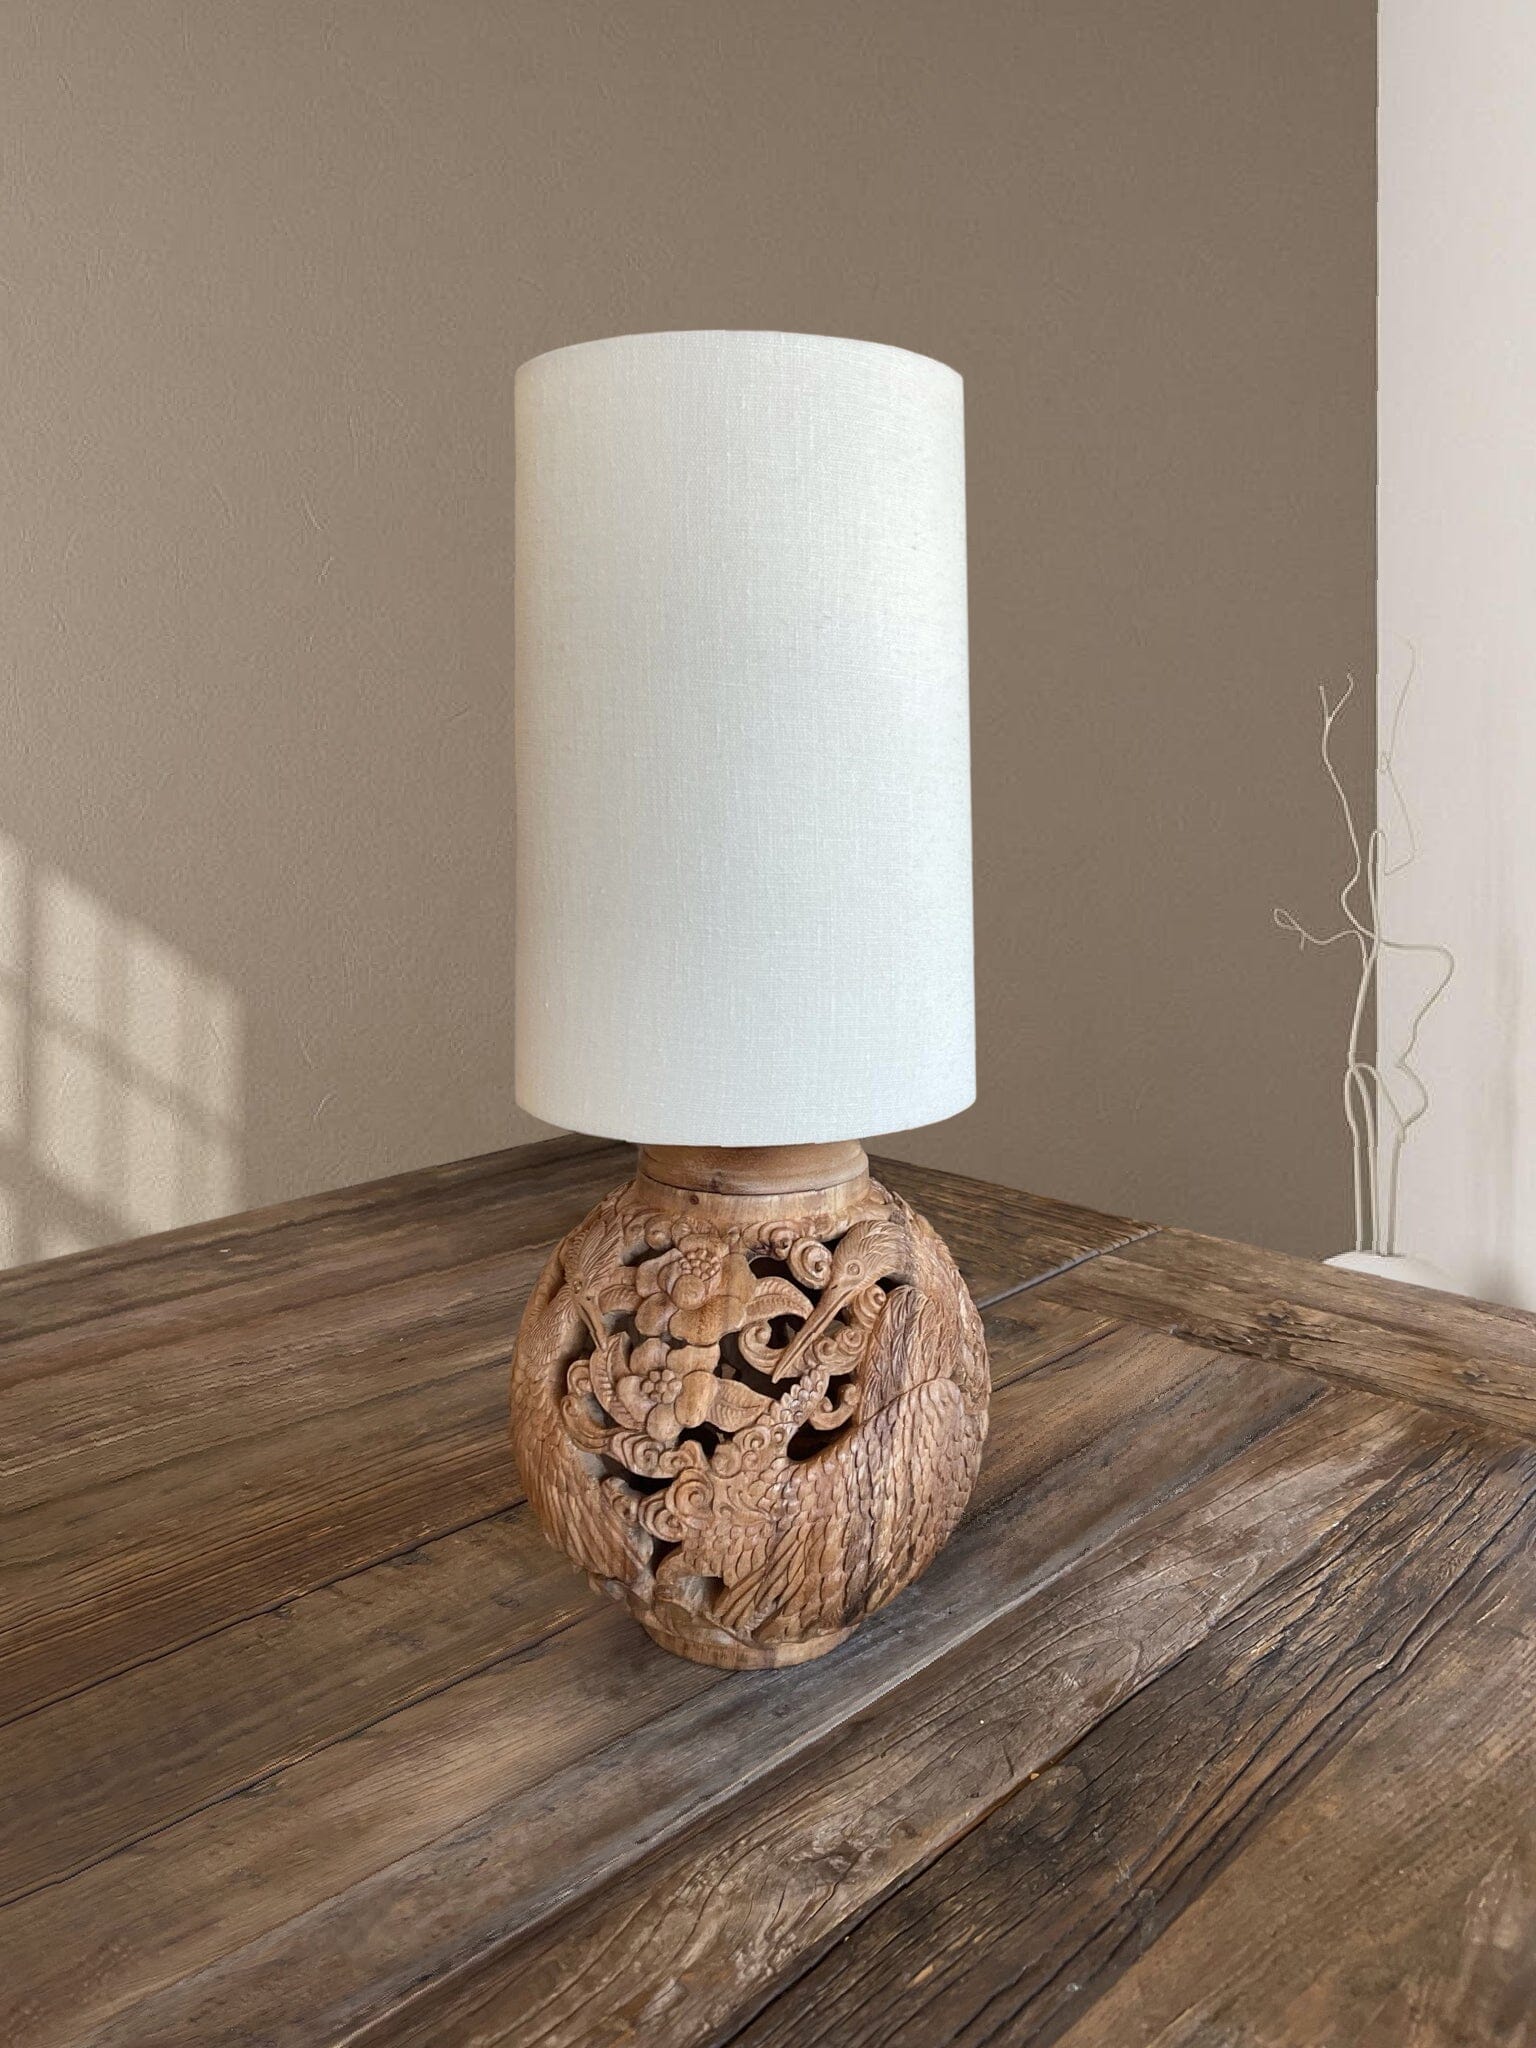 Conference of the Birds Wood Carved Lamp Lamp Blumera 